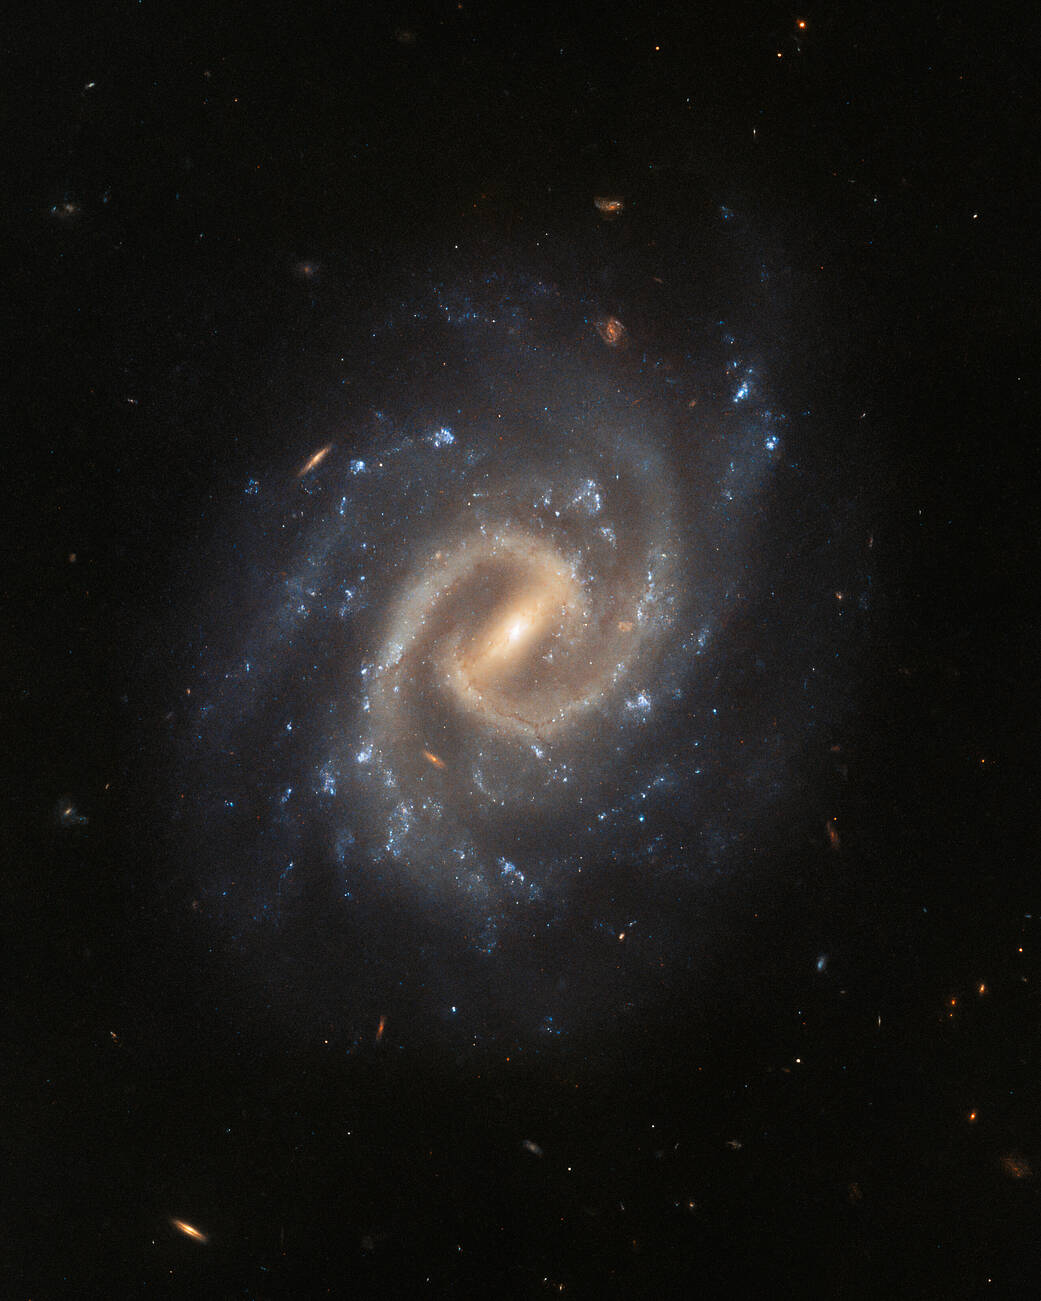 A spiral galaxy directly face-on: Two bright spiral arms extend from a bar, which shines from the center. Fainter arms branch off from these, studded with bright-blue patches of star formation. Small, distant galaxies dotted around on a dark background.